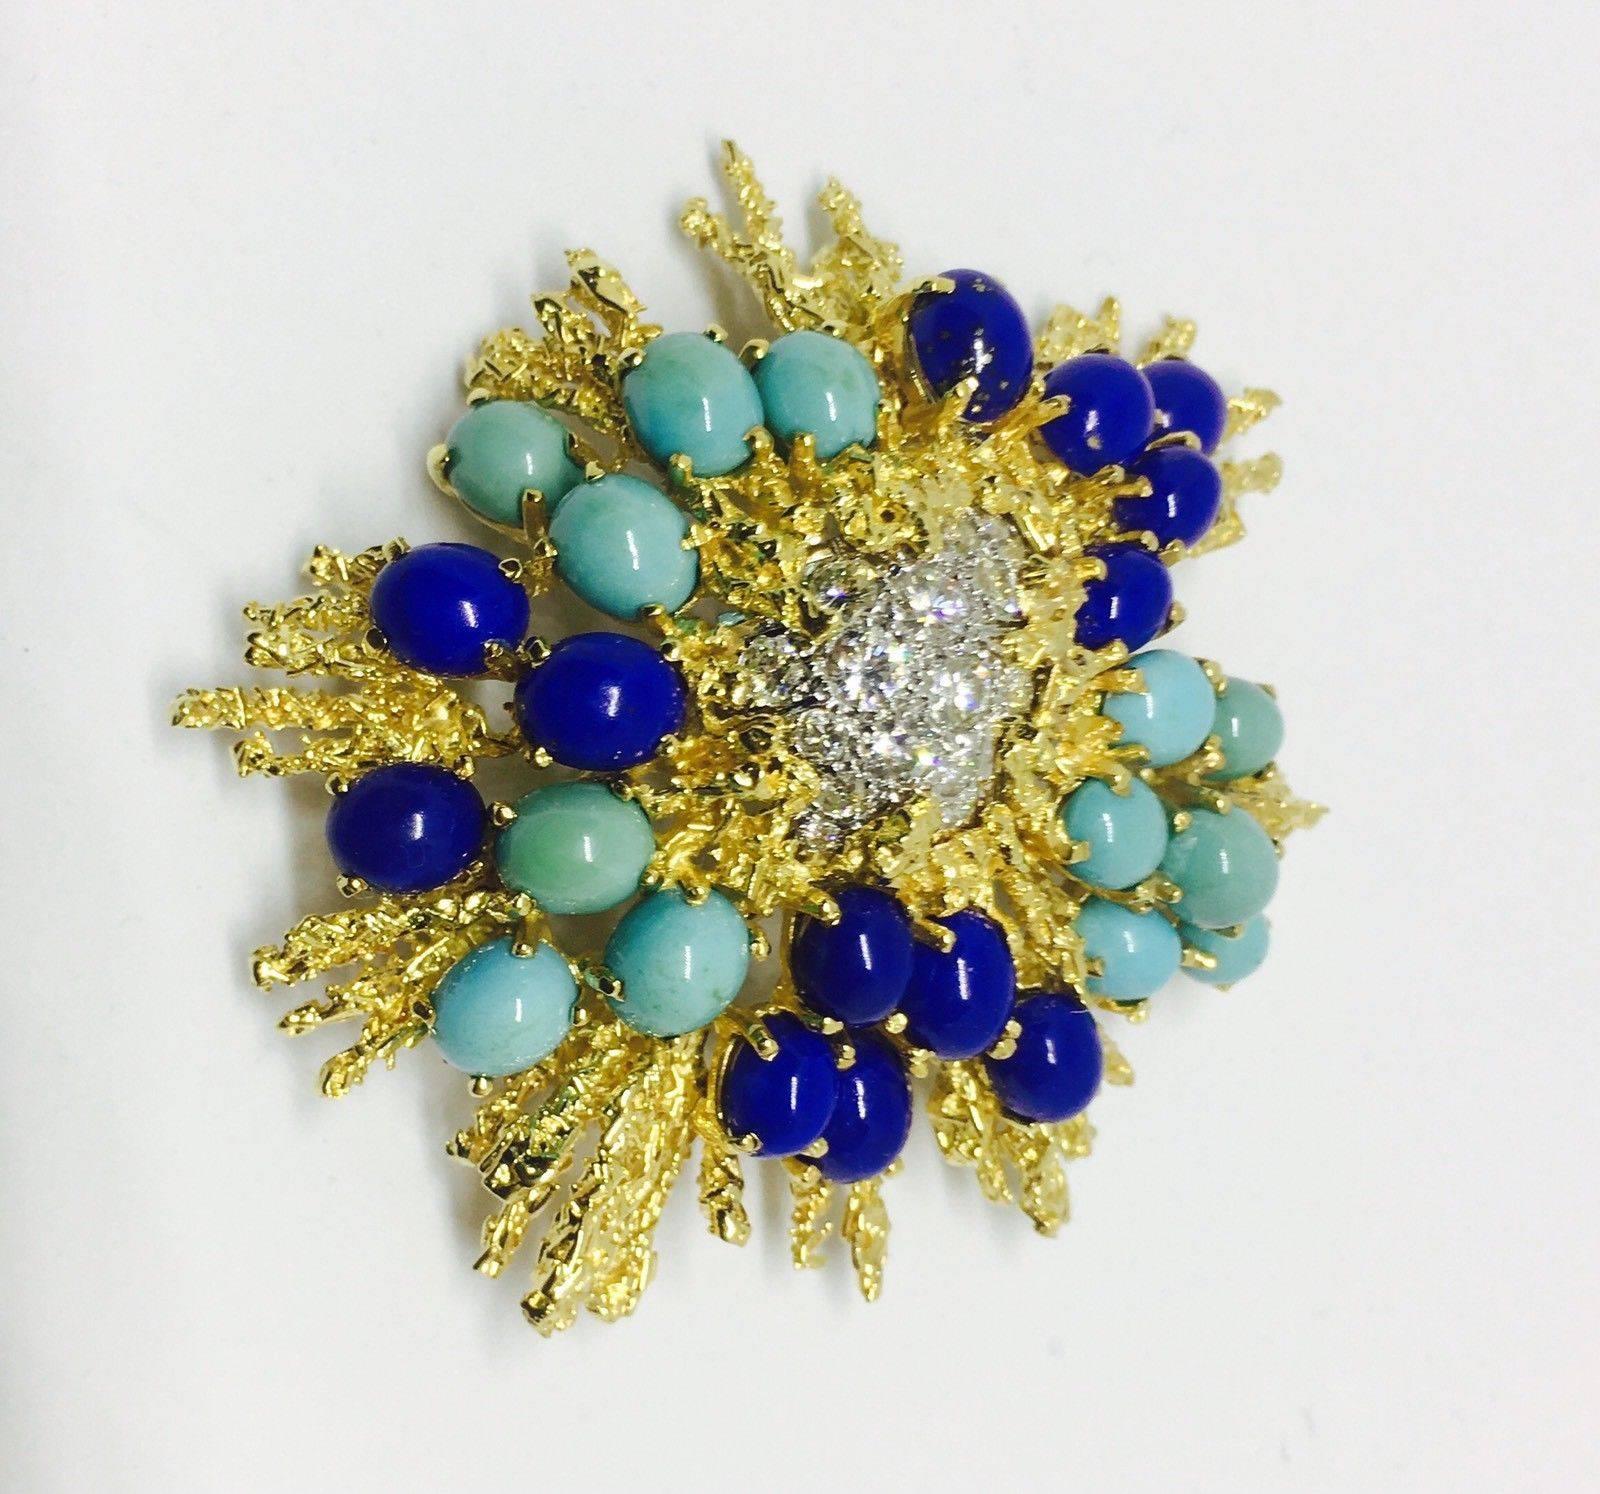 George Schuler 18 Karat Gold Lapis Turquoise Diamond Brooch Pin Necklace Pendant In Excellent Condition For Sale In Shaker Heights, OH